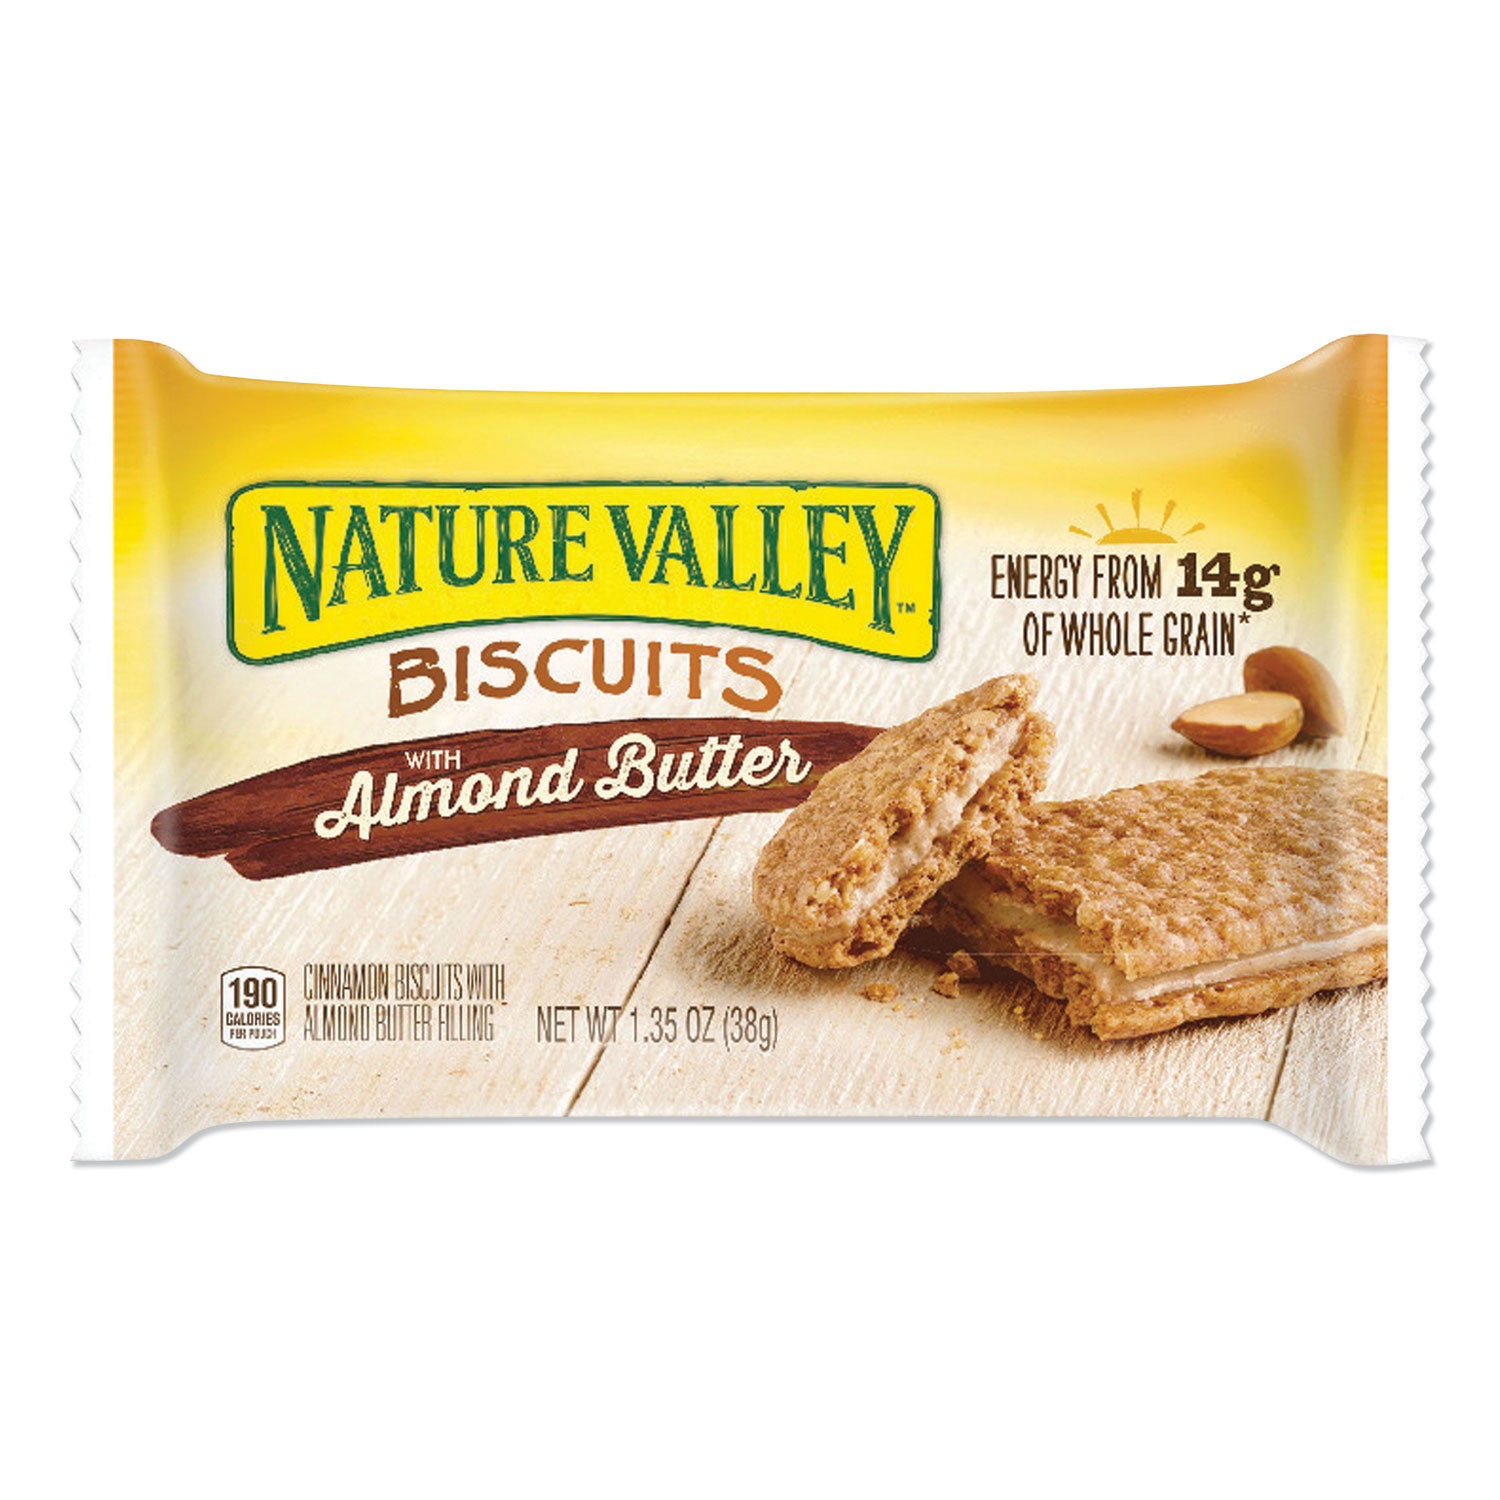  Nature Valley GEM47879 Biscuits, Cinnamon with Almond Butter, 1.35 oz Pouch, 16/Box (NVL2720829) 